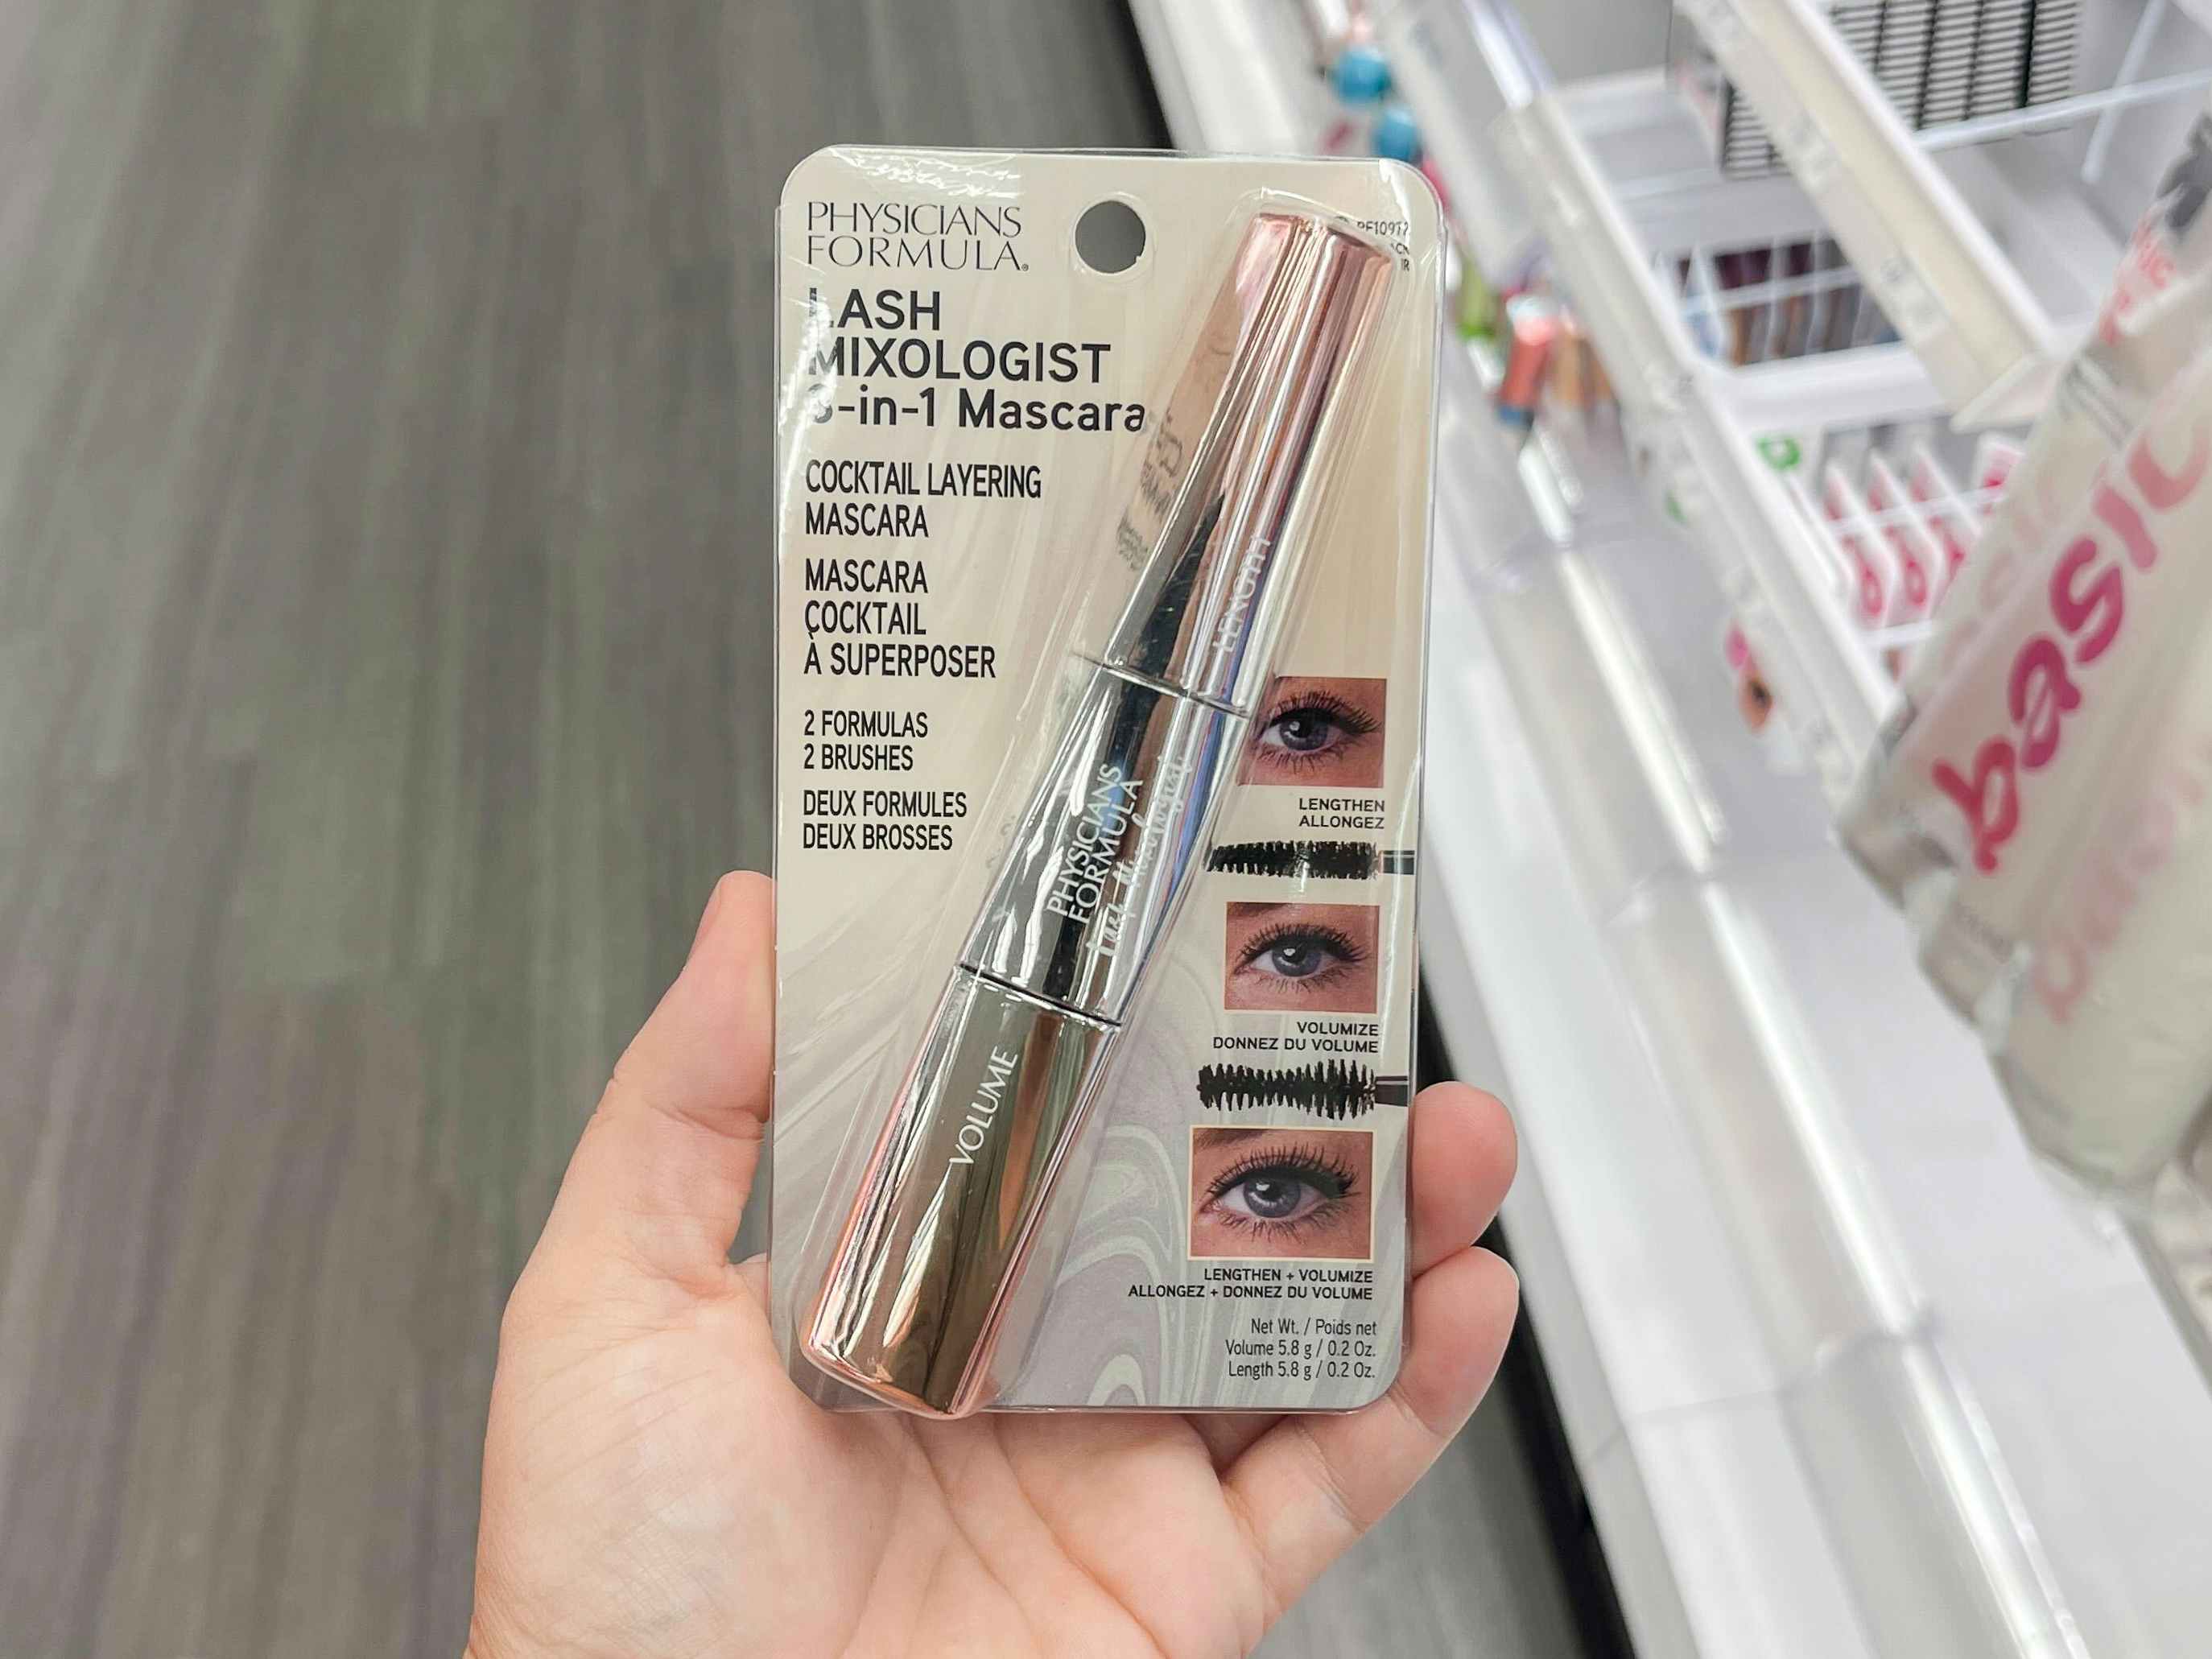 A person's hand holding a Physicians Formula Lash Mixologist Mascara in the beauty aisle at Target.